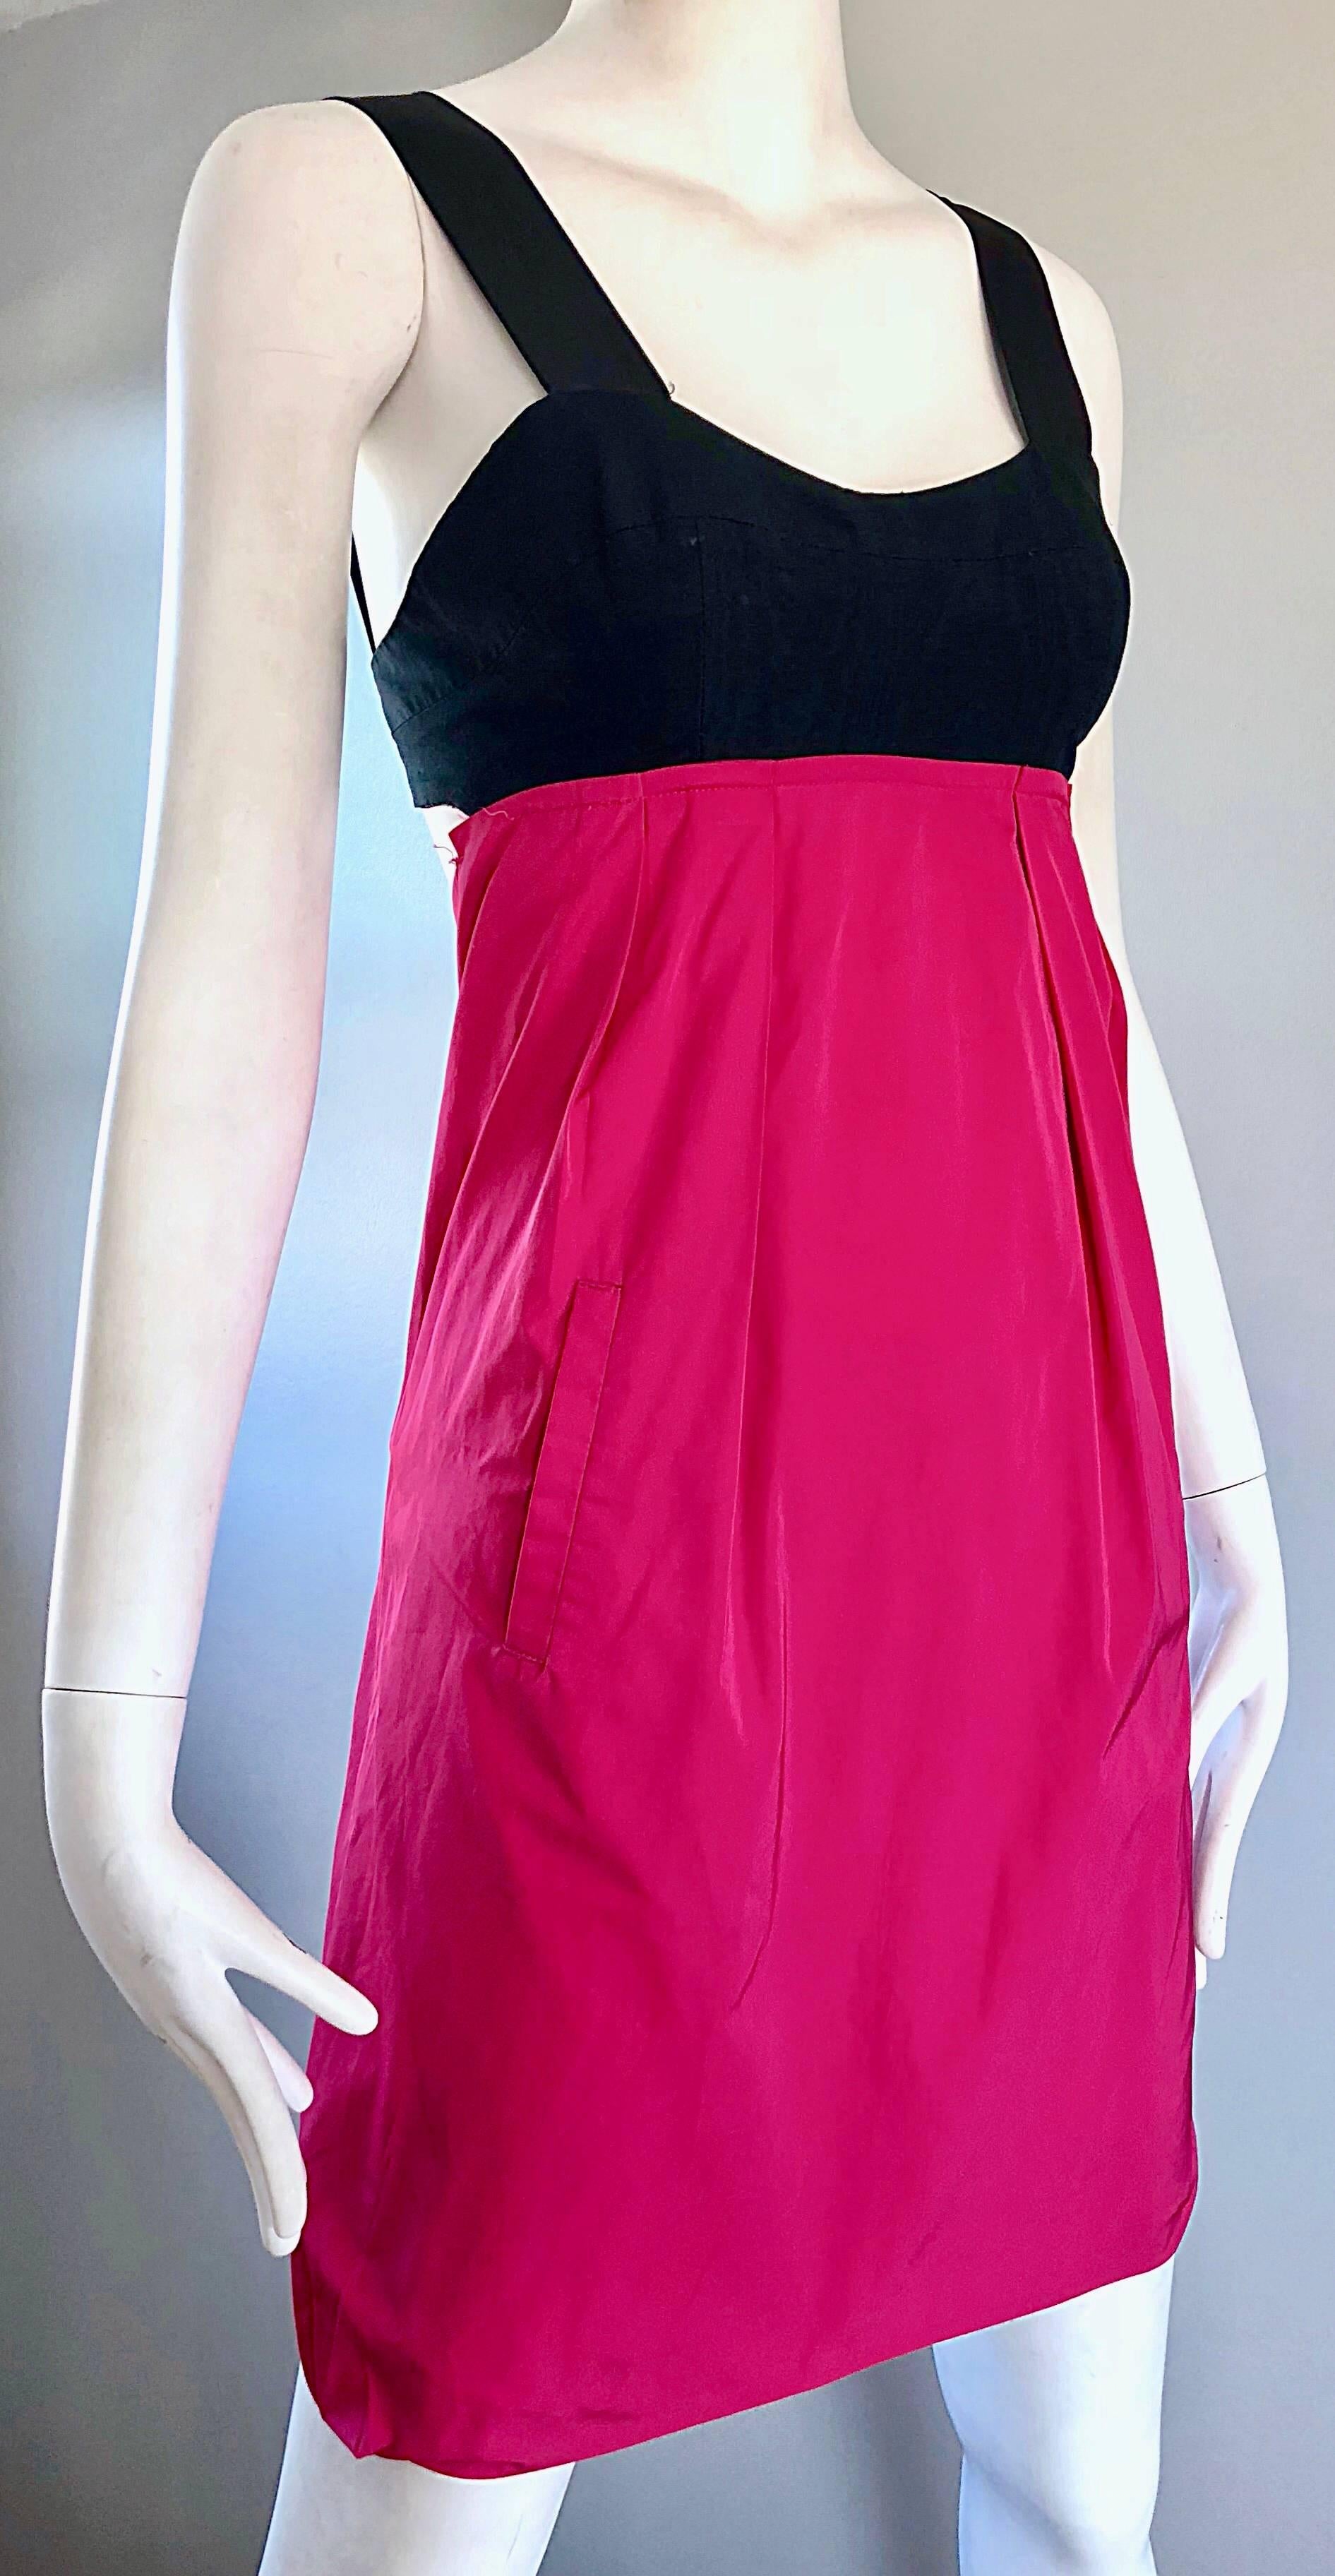 Women's Yigal Azrouel Size 2 / 4 Hot Pink and Black Color Block Open Back Shift Dress For Sale